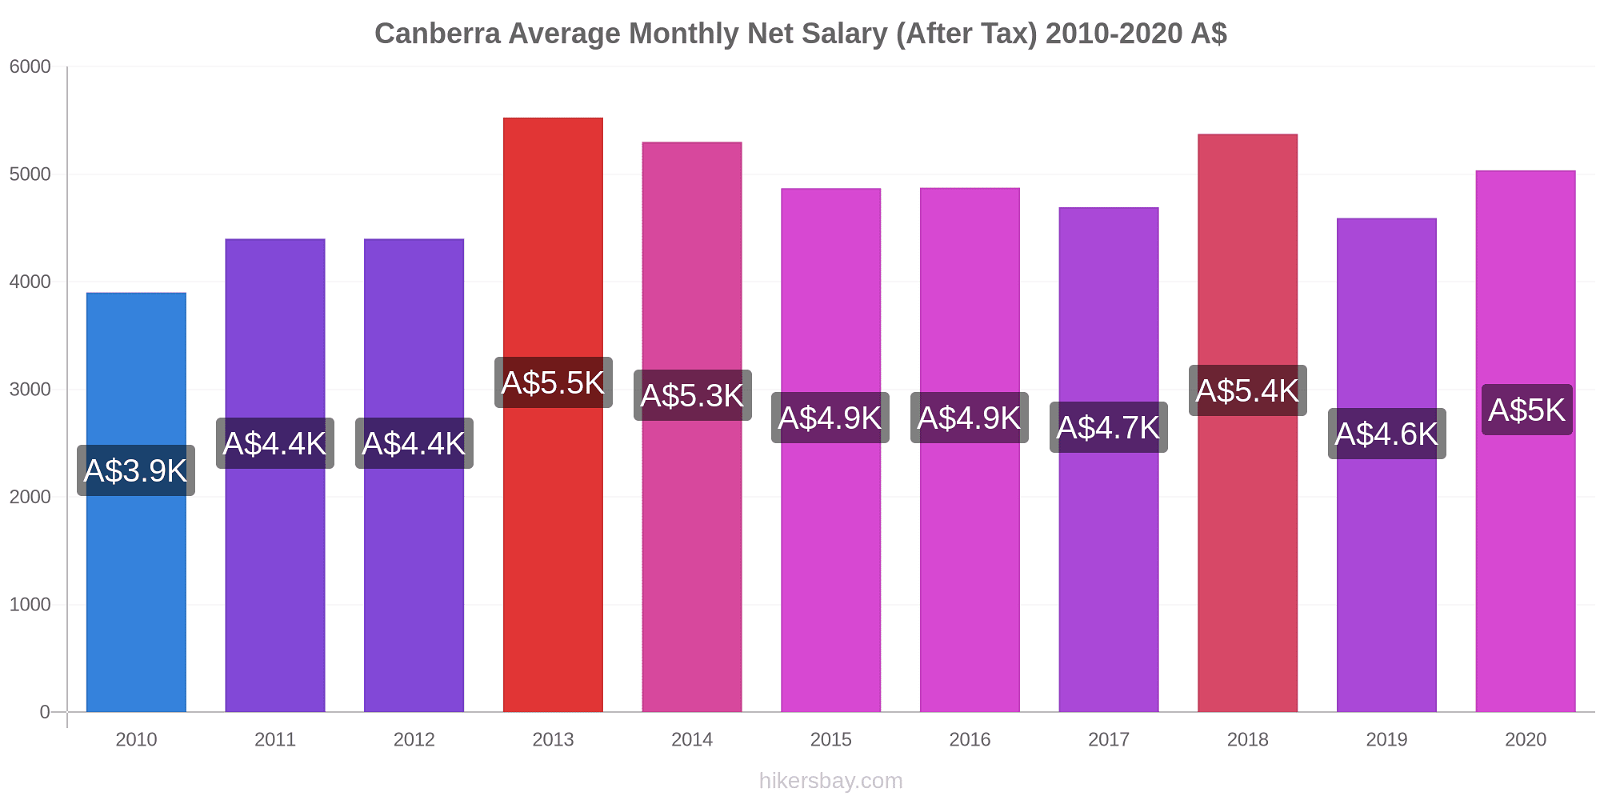 Canberra price changes Average Monthly Net Salary (After Tax) hikersbay.com